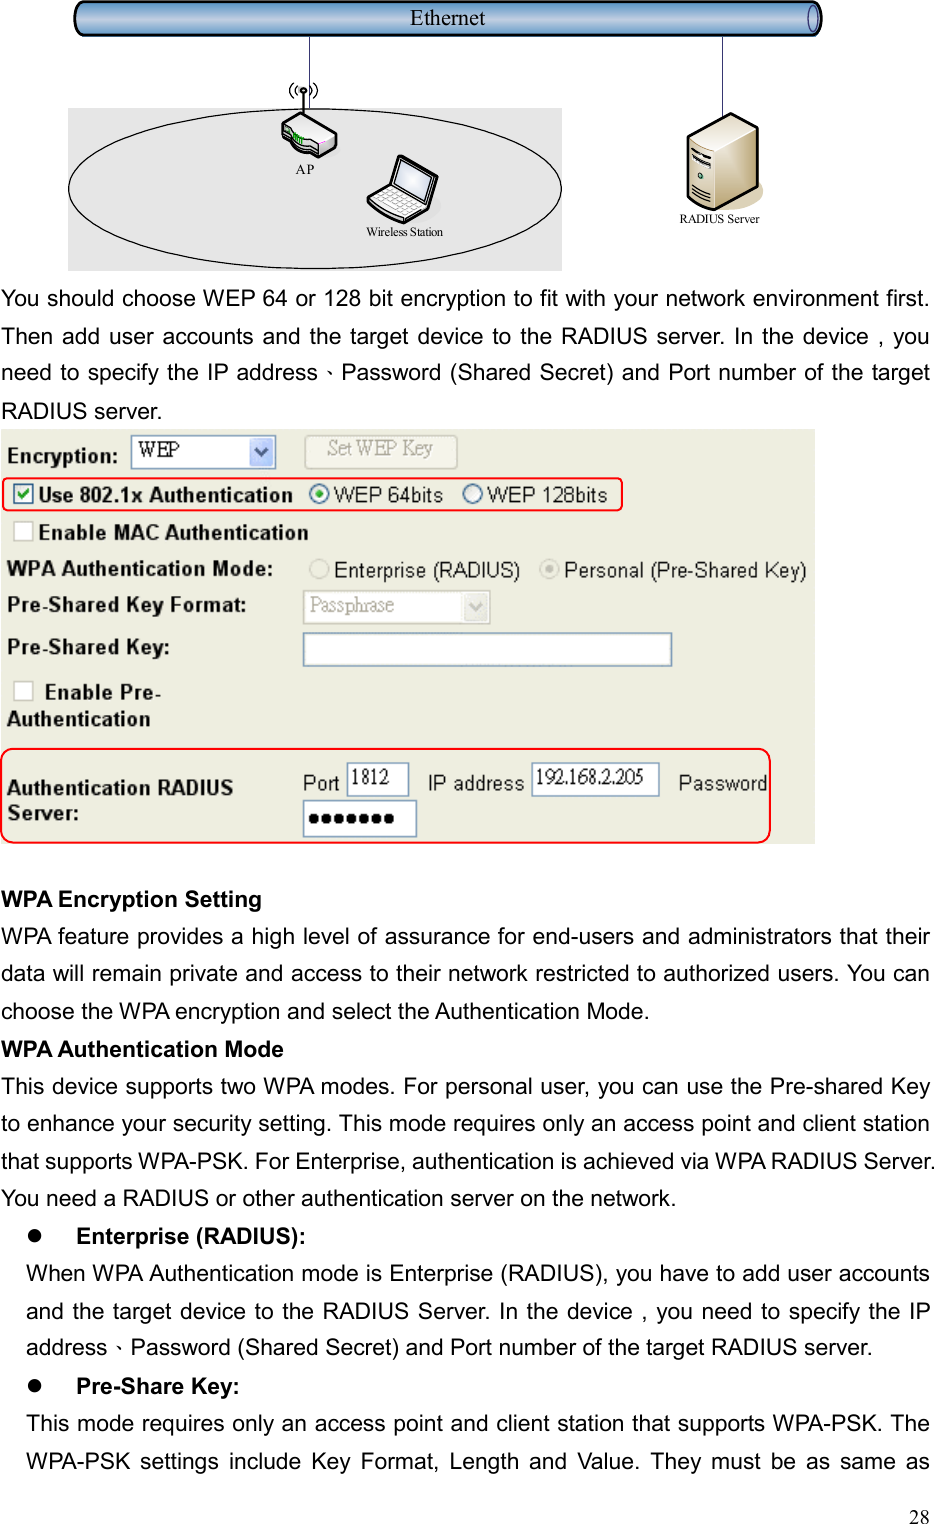  28     EthernetRADIUS ServerWireless StationAP You should choose WEP 64 or 128 bit encryption to fit with your network environment first. Then add user accounts and the target device to the RADIUS server. In the device , you need to specify the IP address、Password (Shared Secret) and Port number of the target RADIUS server.  WPA Encryption Setting WPA feature provides a high level of assurance for end-users and administrators that their data will remain private and access to their network restricted to authorized users. You can choose the WPA encryption and select the Authentication Mode. WPA Authentication Mode This device supports two WPA modes. For personal user, you can use the Pre-shared Key to enhance your security setting. This mode requires only an access point and client station that supports WPA-PSK. For Enterprise, authentication is achieved via WPA RADIUS Server. You need a RADIUS or other authentication server on the network.   Enterprise (RADIUS): When WPA Authentication mode is Enterprise (RADIUS), you have to add user accounts and the target device to the RADIUS Server. In the device , you need to specify the IP address、Password (Shared Secret) and Port number of the target RADIUS server.   Pre-Share Key: This mode requires only an access point and client station that supports WPA-PSK. The WPA-PSK settings include Key Format, Length and Value. They must be as same as 